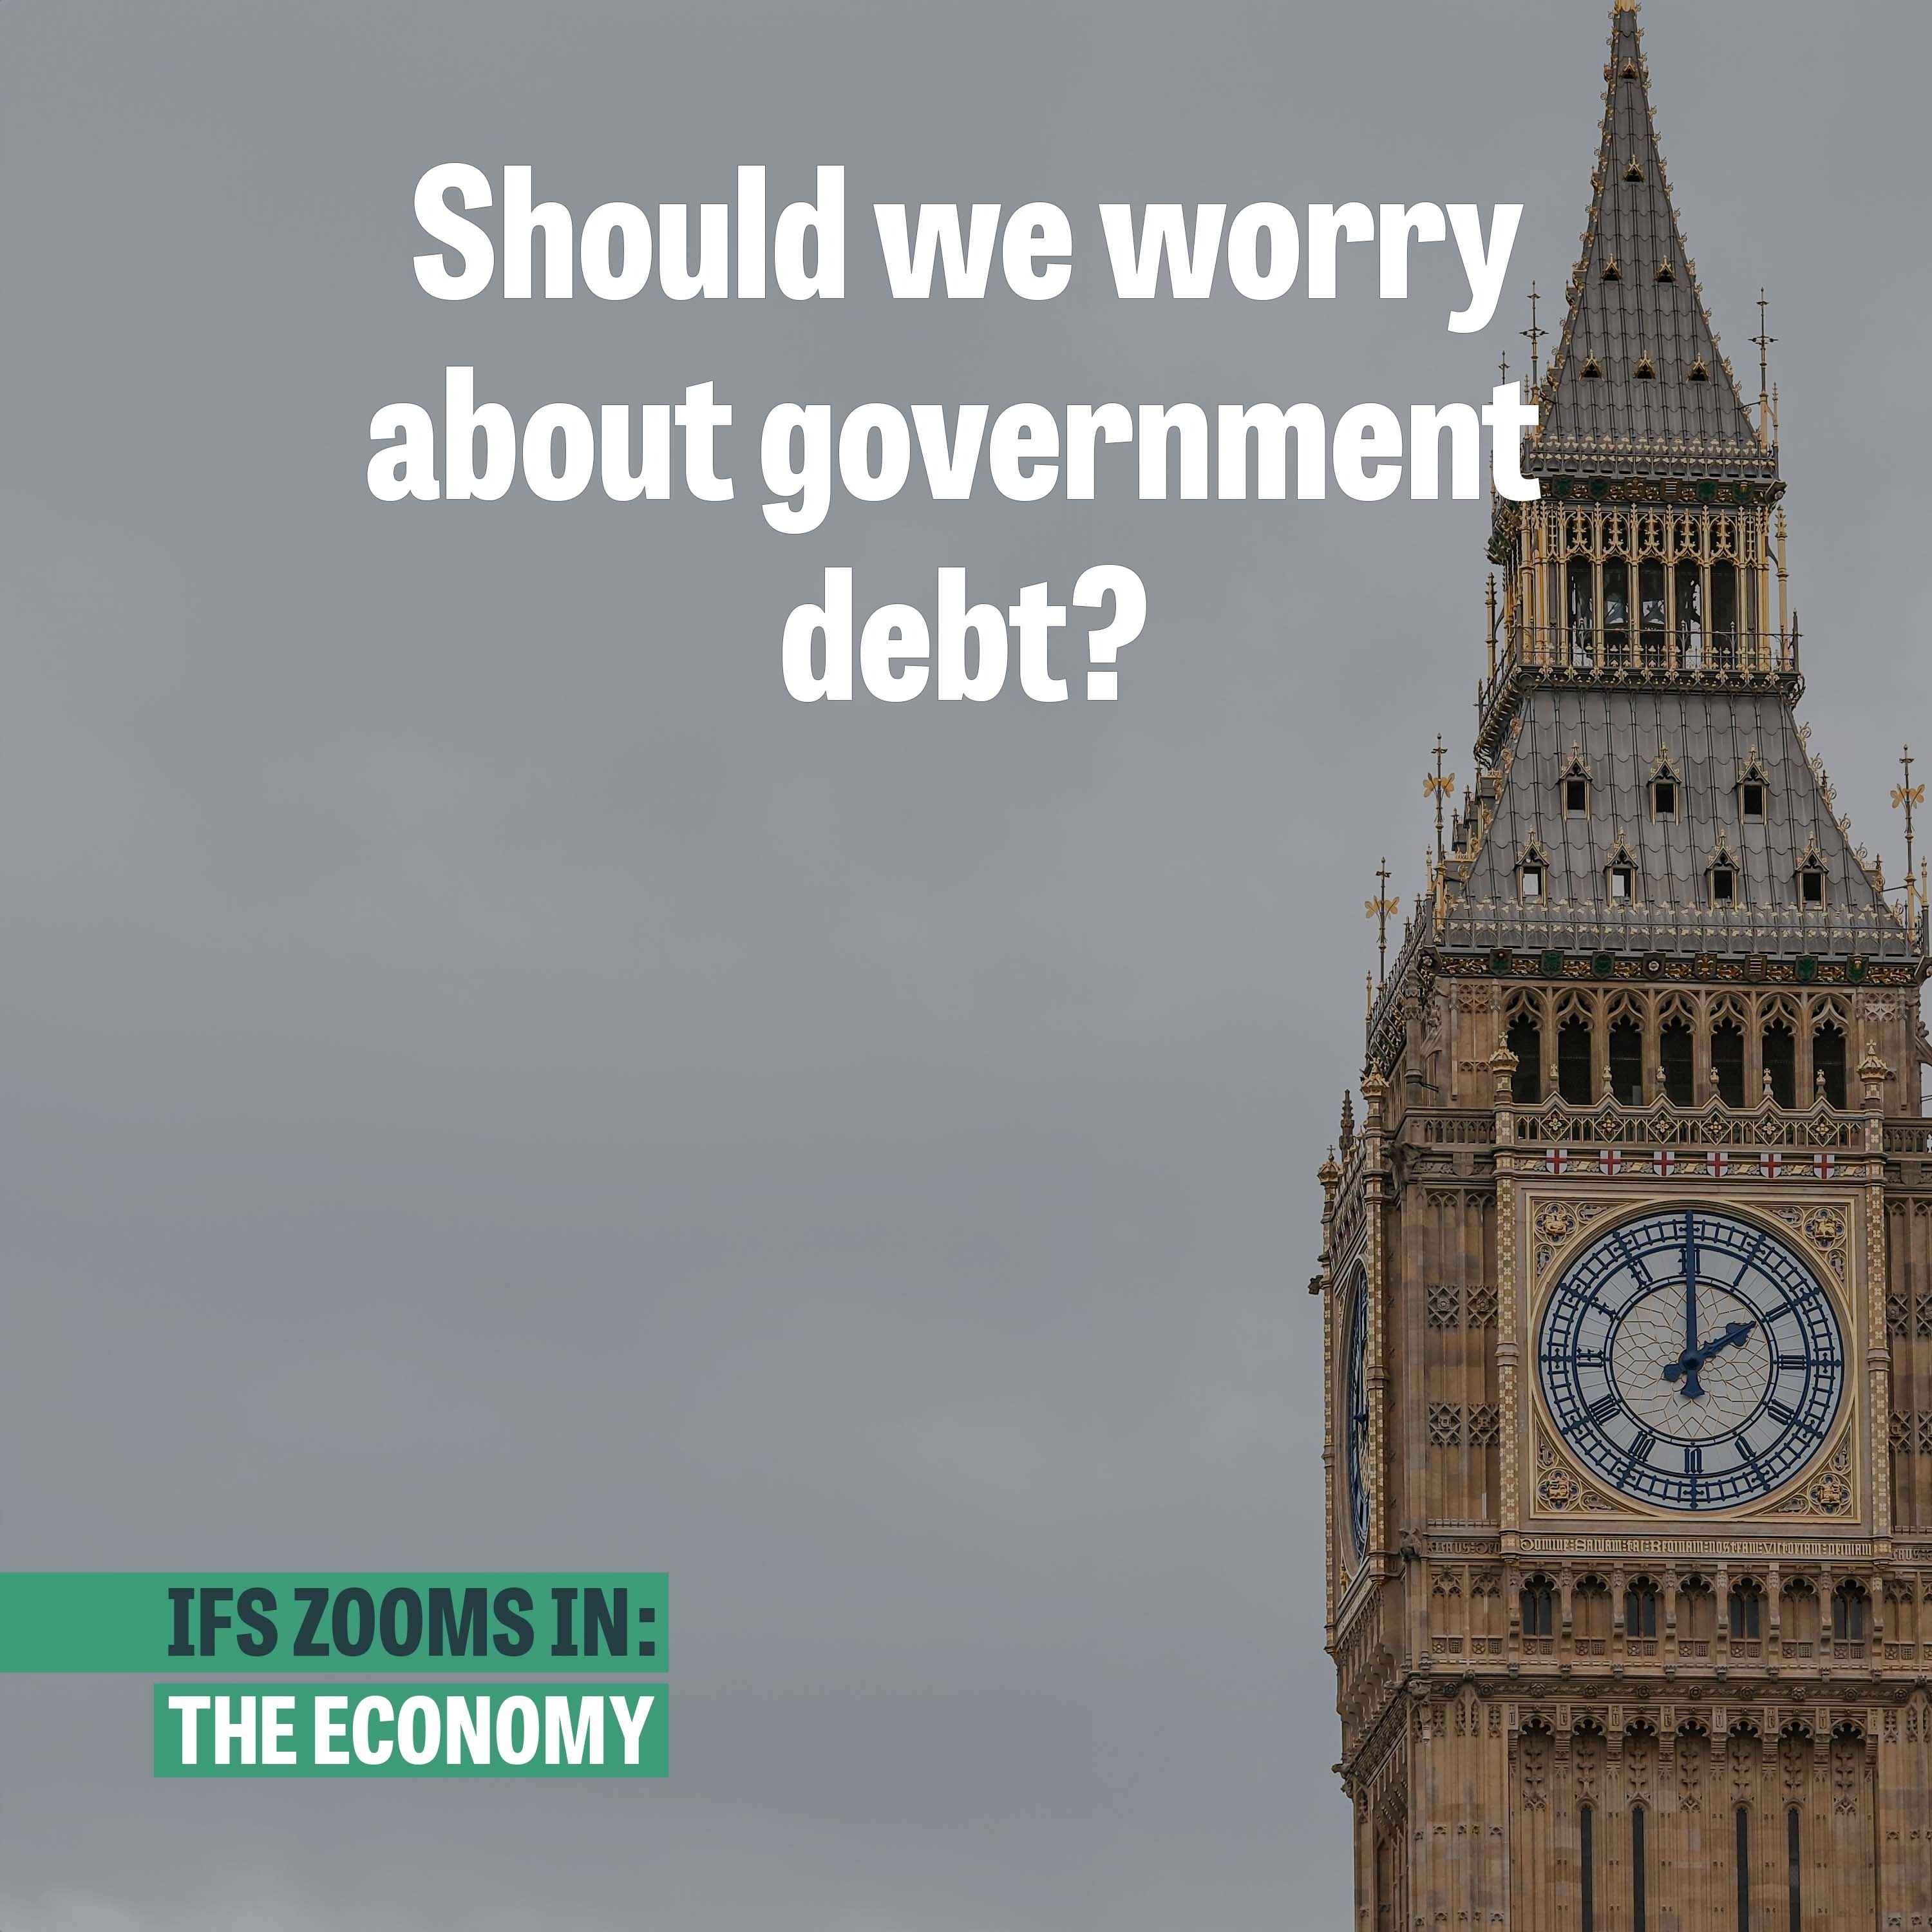 Should we worry about government debt?